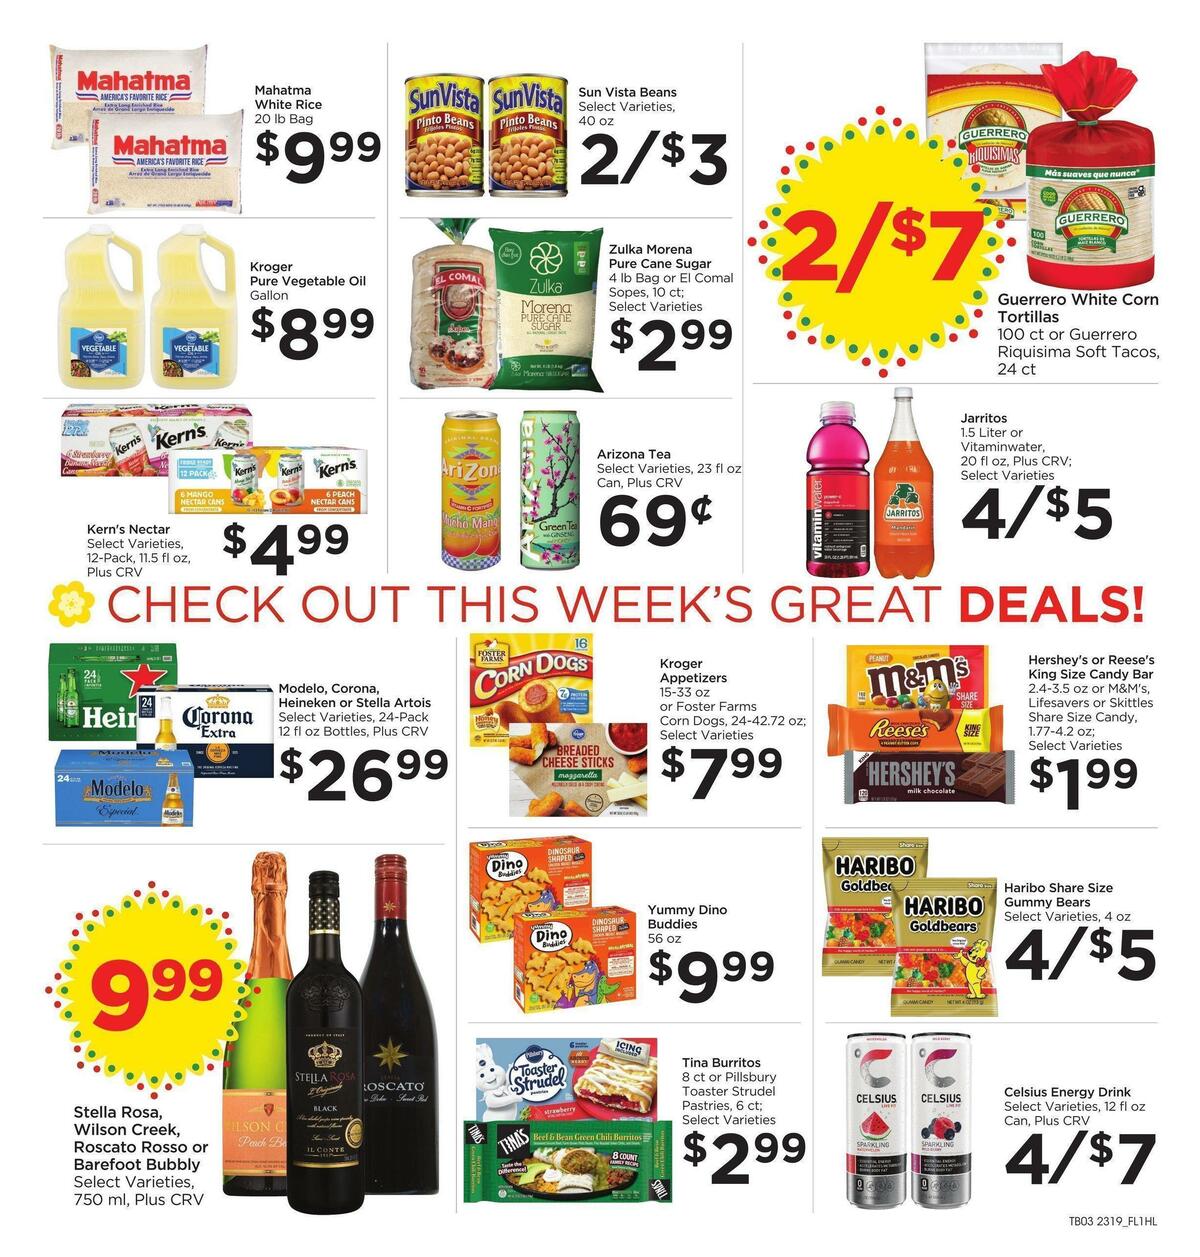 Food 4 Less Weekly Ad from June 7